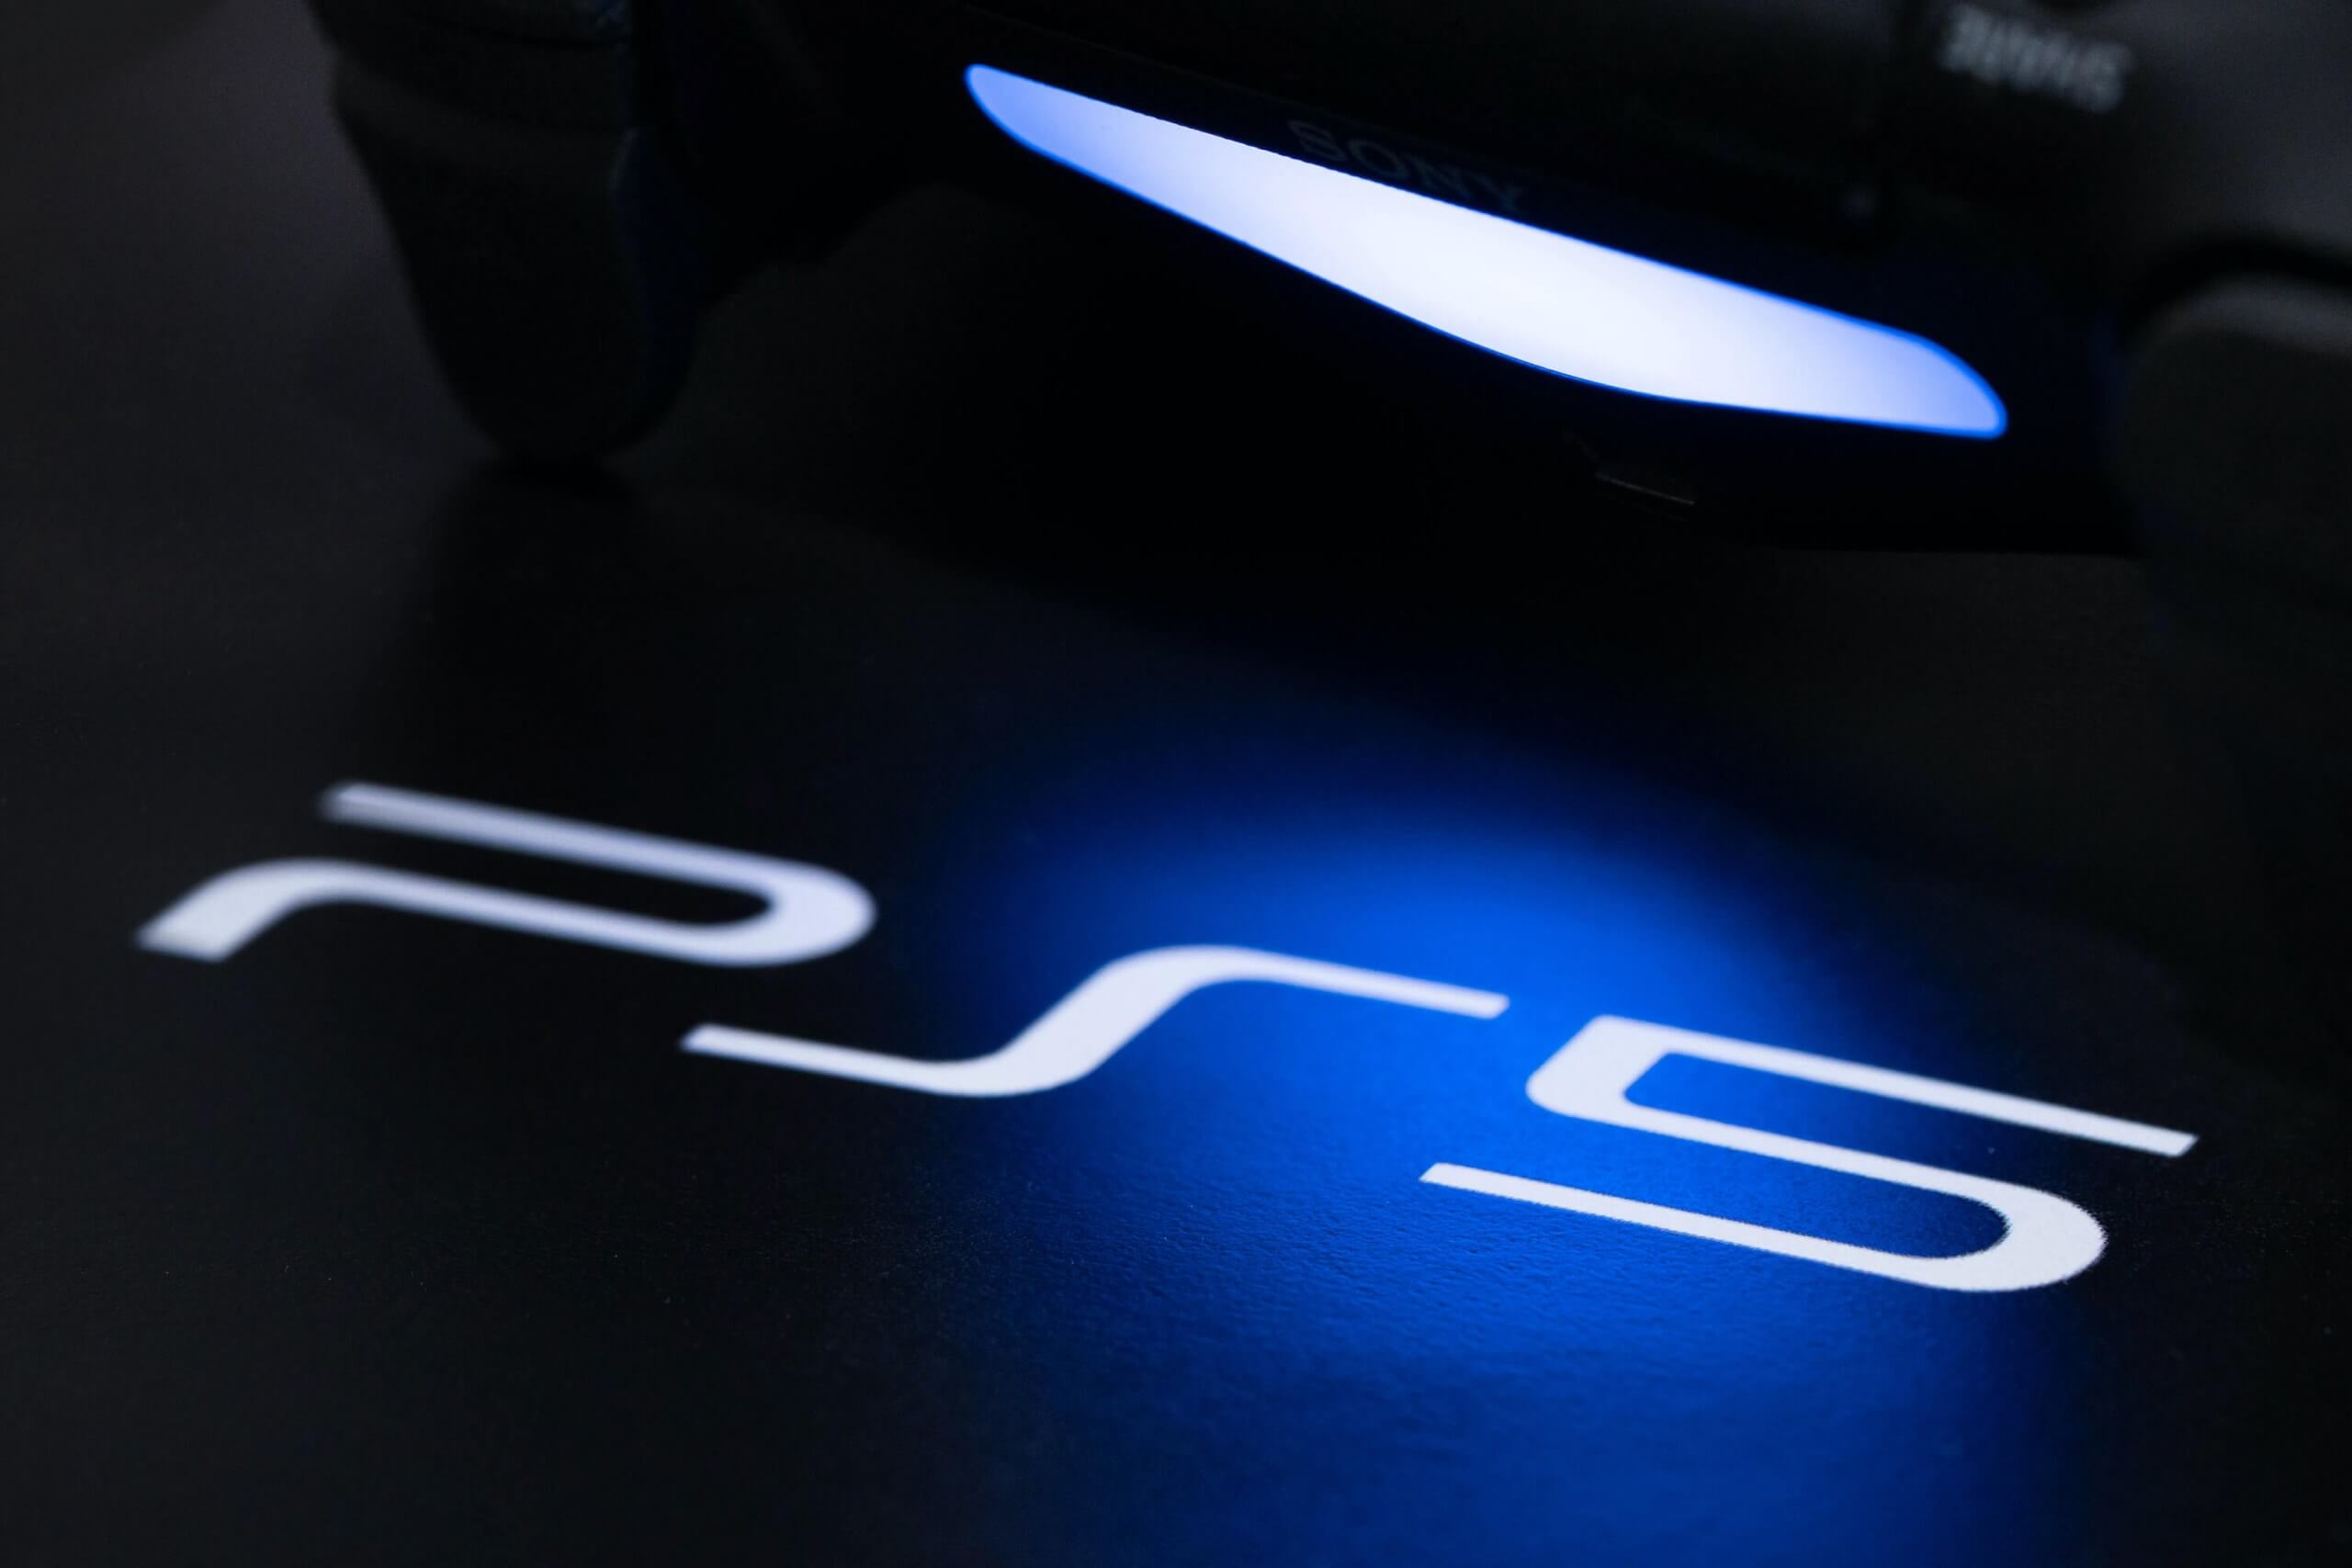 Job listing reveals possible PlayStation 5 release date of October 2020